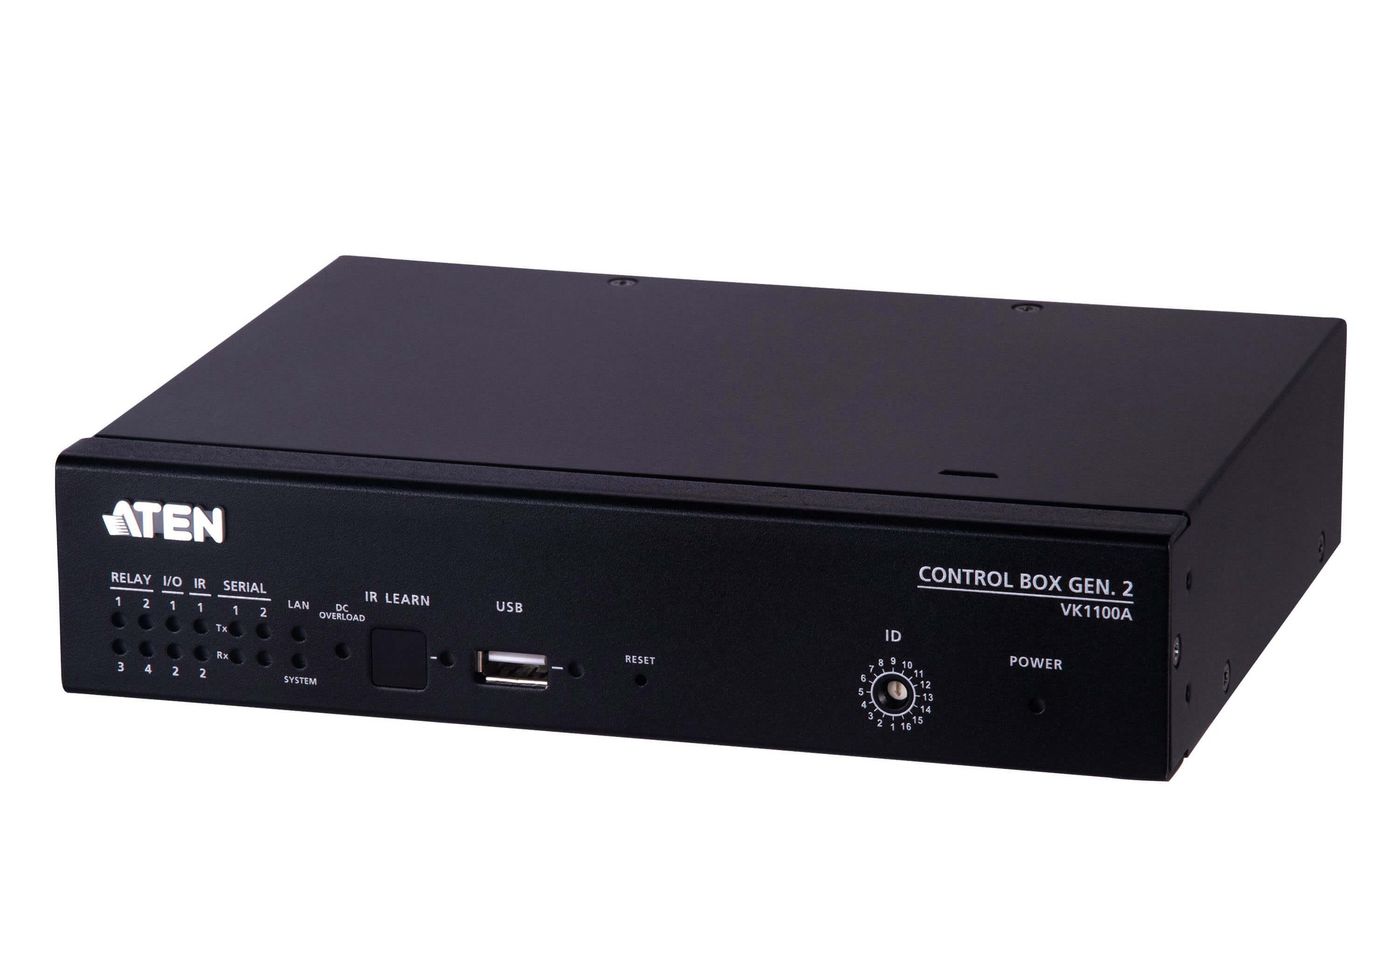 Multi-interface Compact Control Box With 2 App Licenses Gen 2